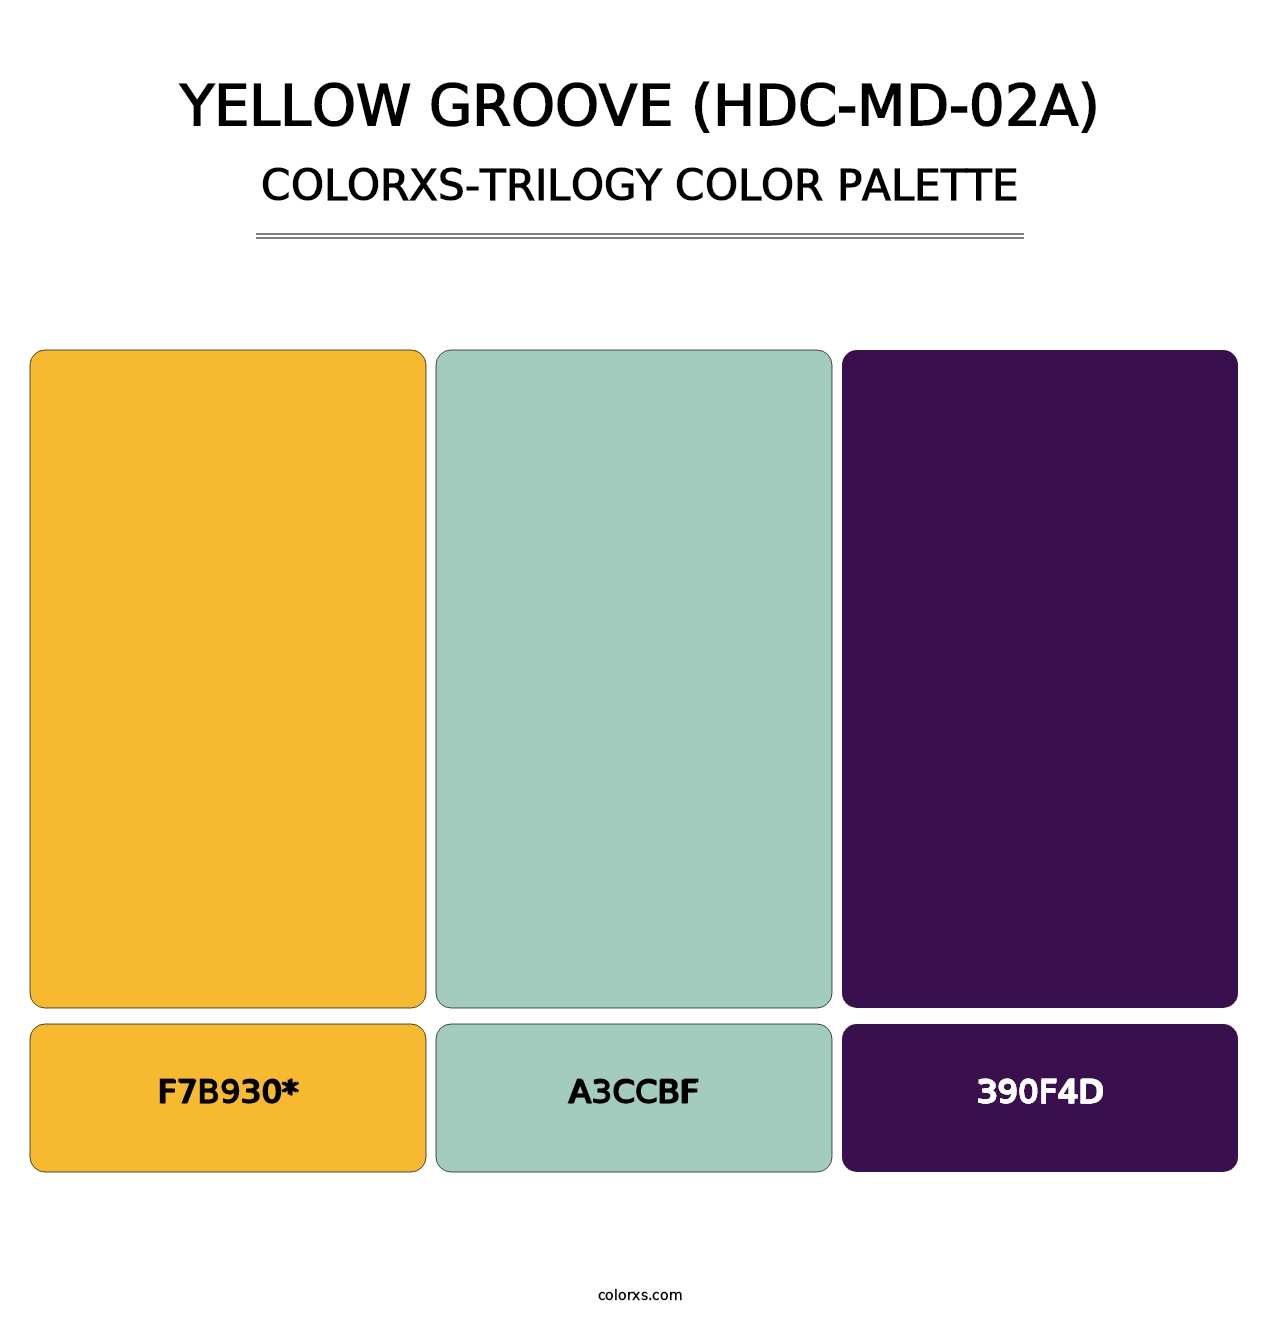 Yellow Groove (HDC-MD-02A) - Colorxs Trilogy Palette